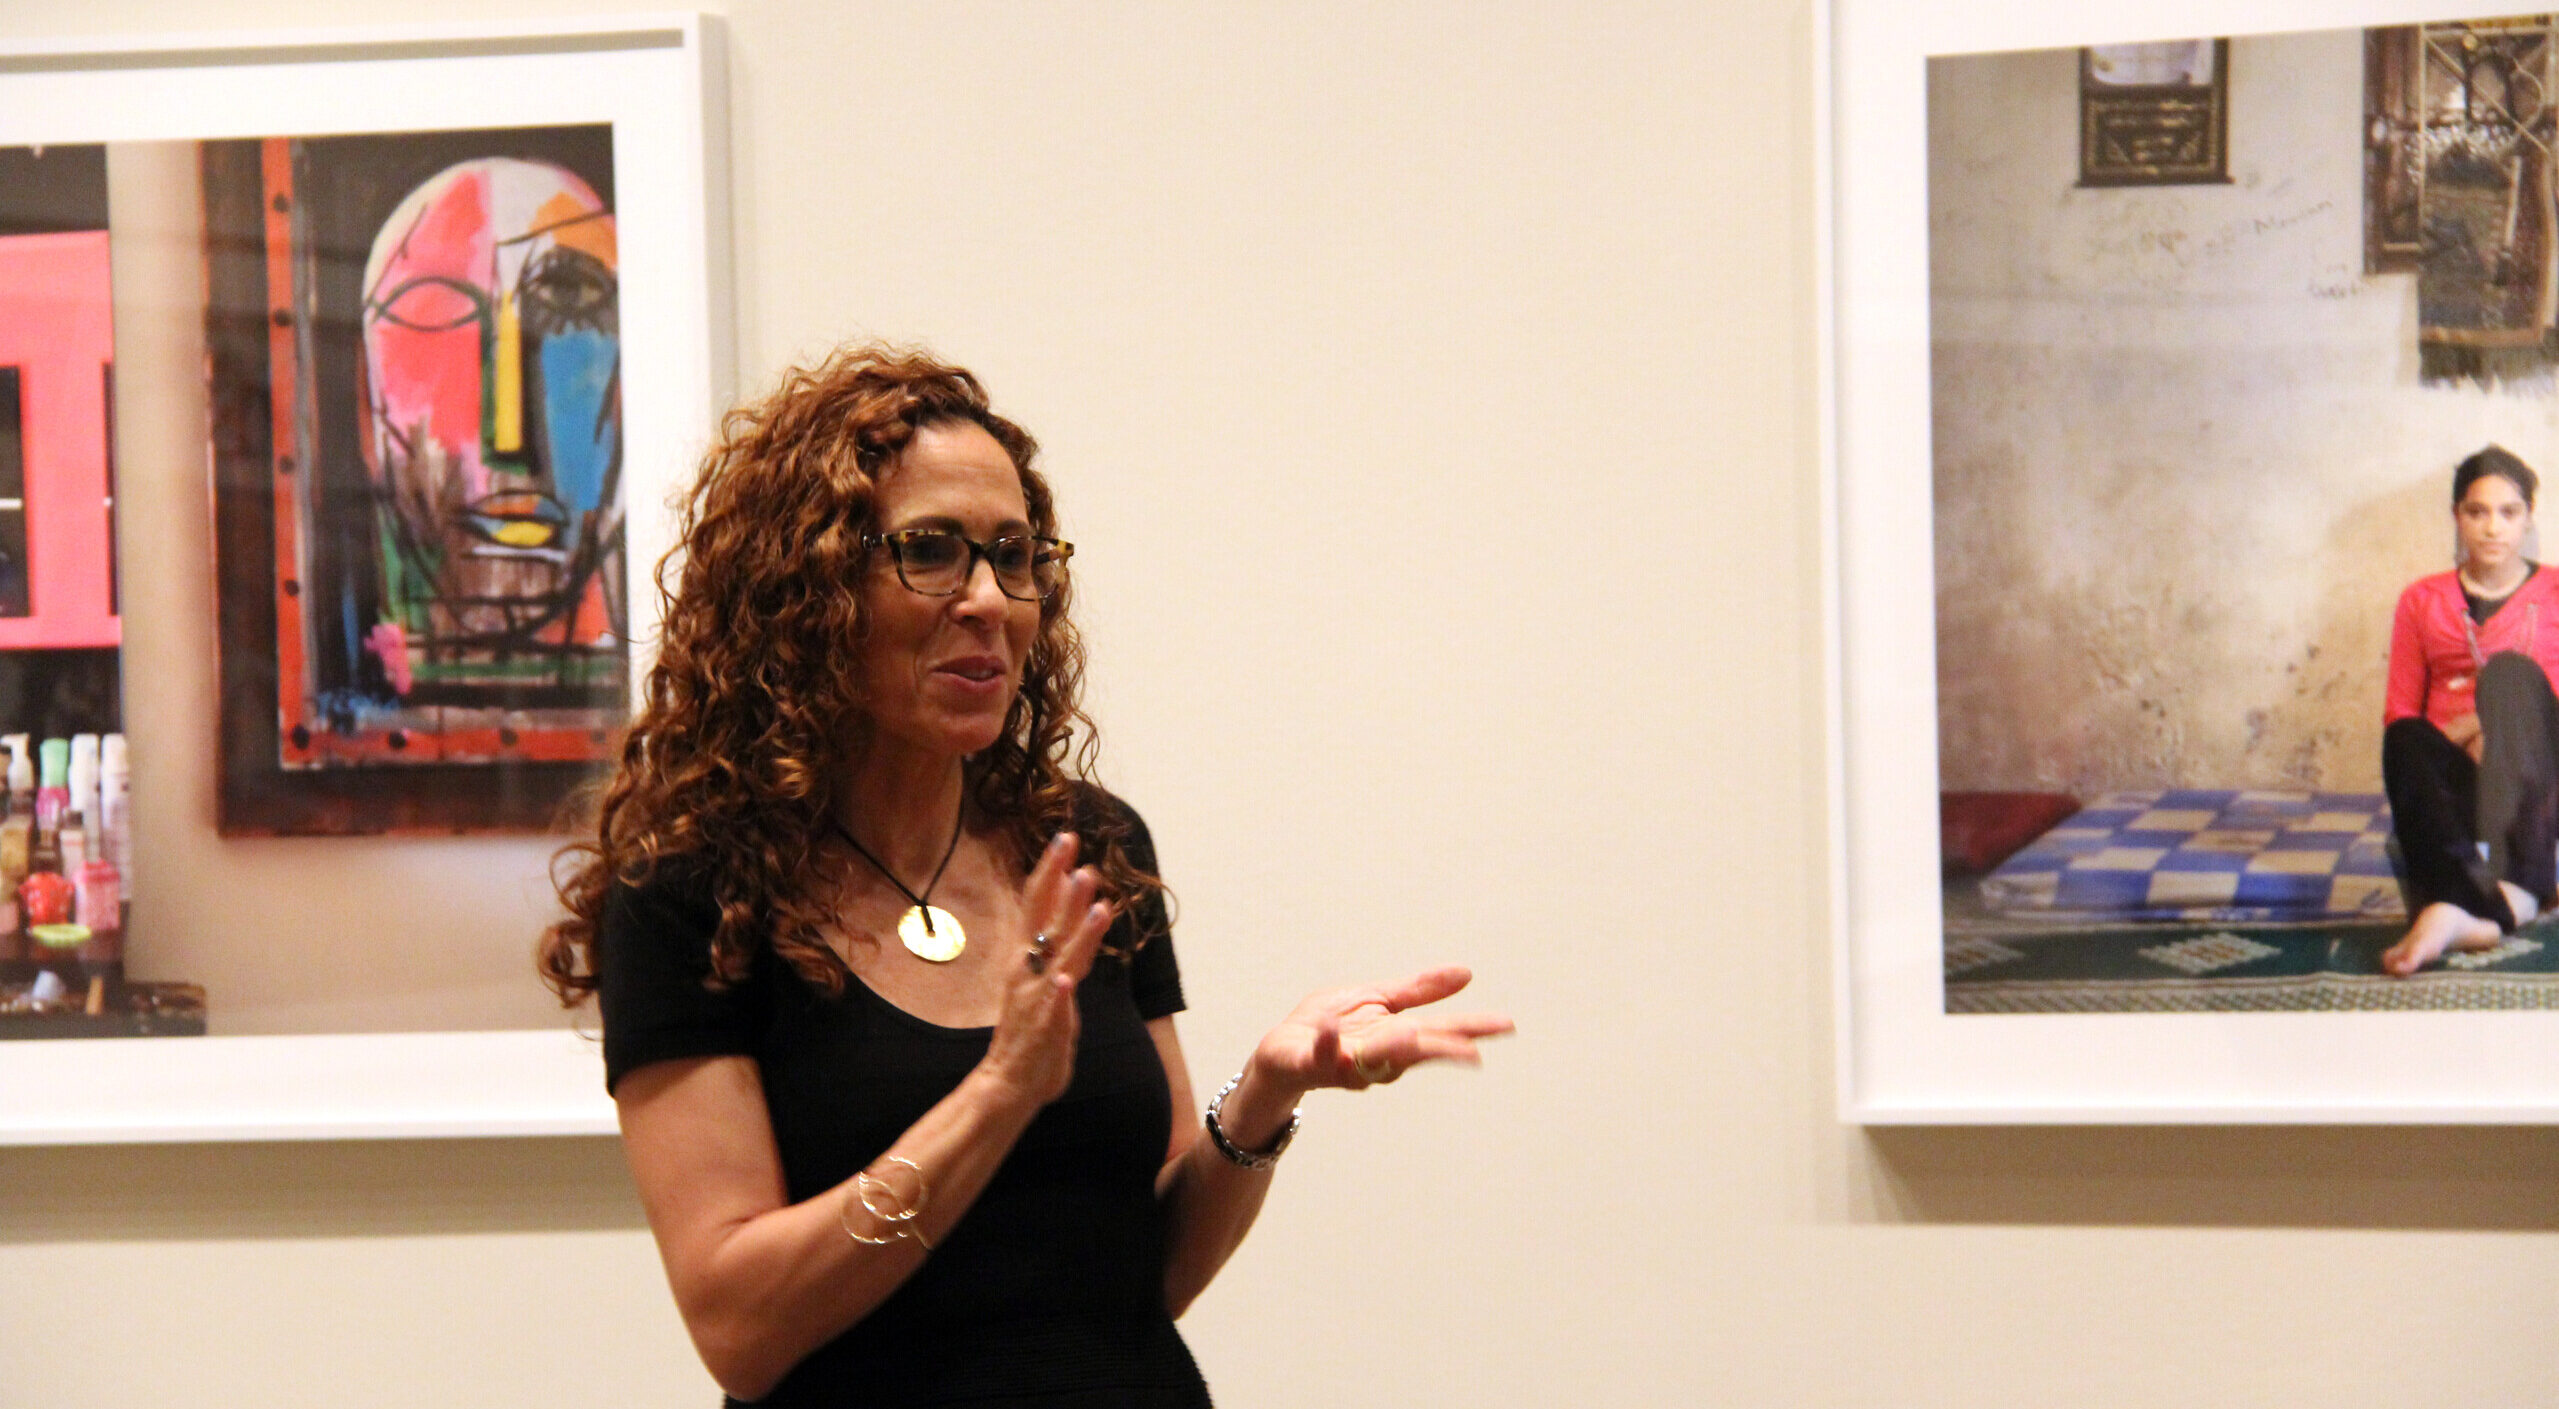 A woman with medium skin tone and curly auburn hair and glasses gestures with her hands as she speaks in a gallery between two colorful photographs.